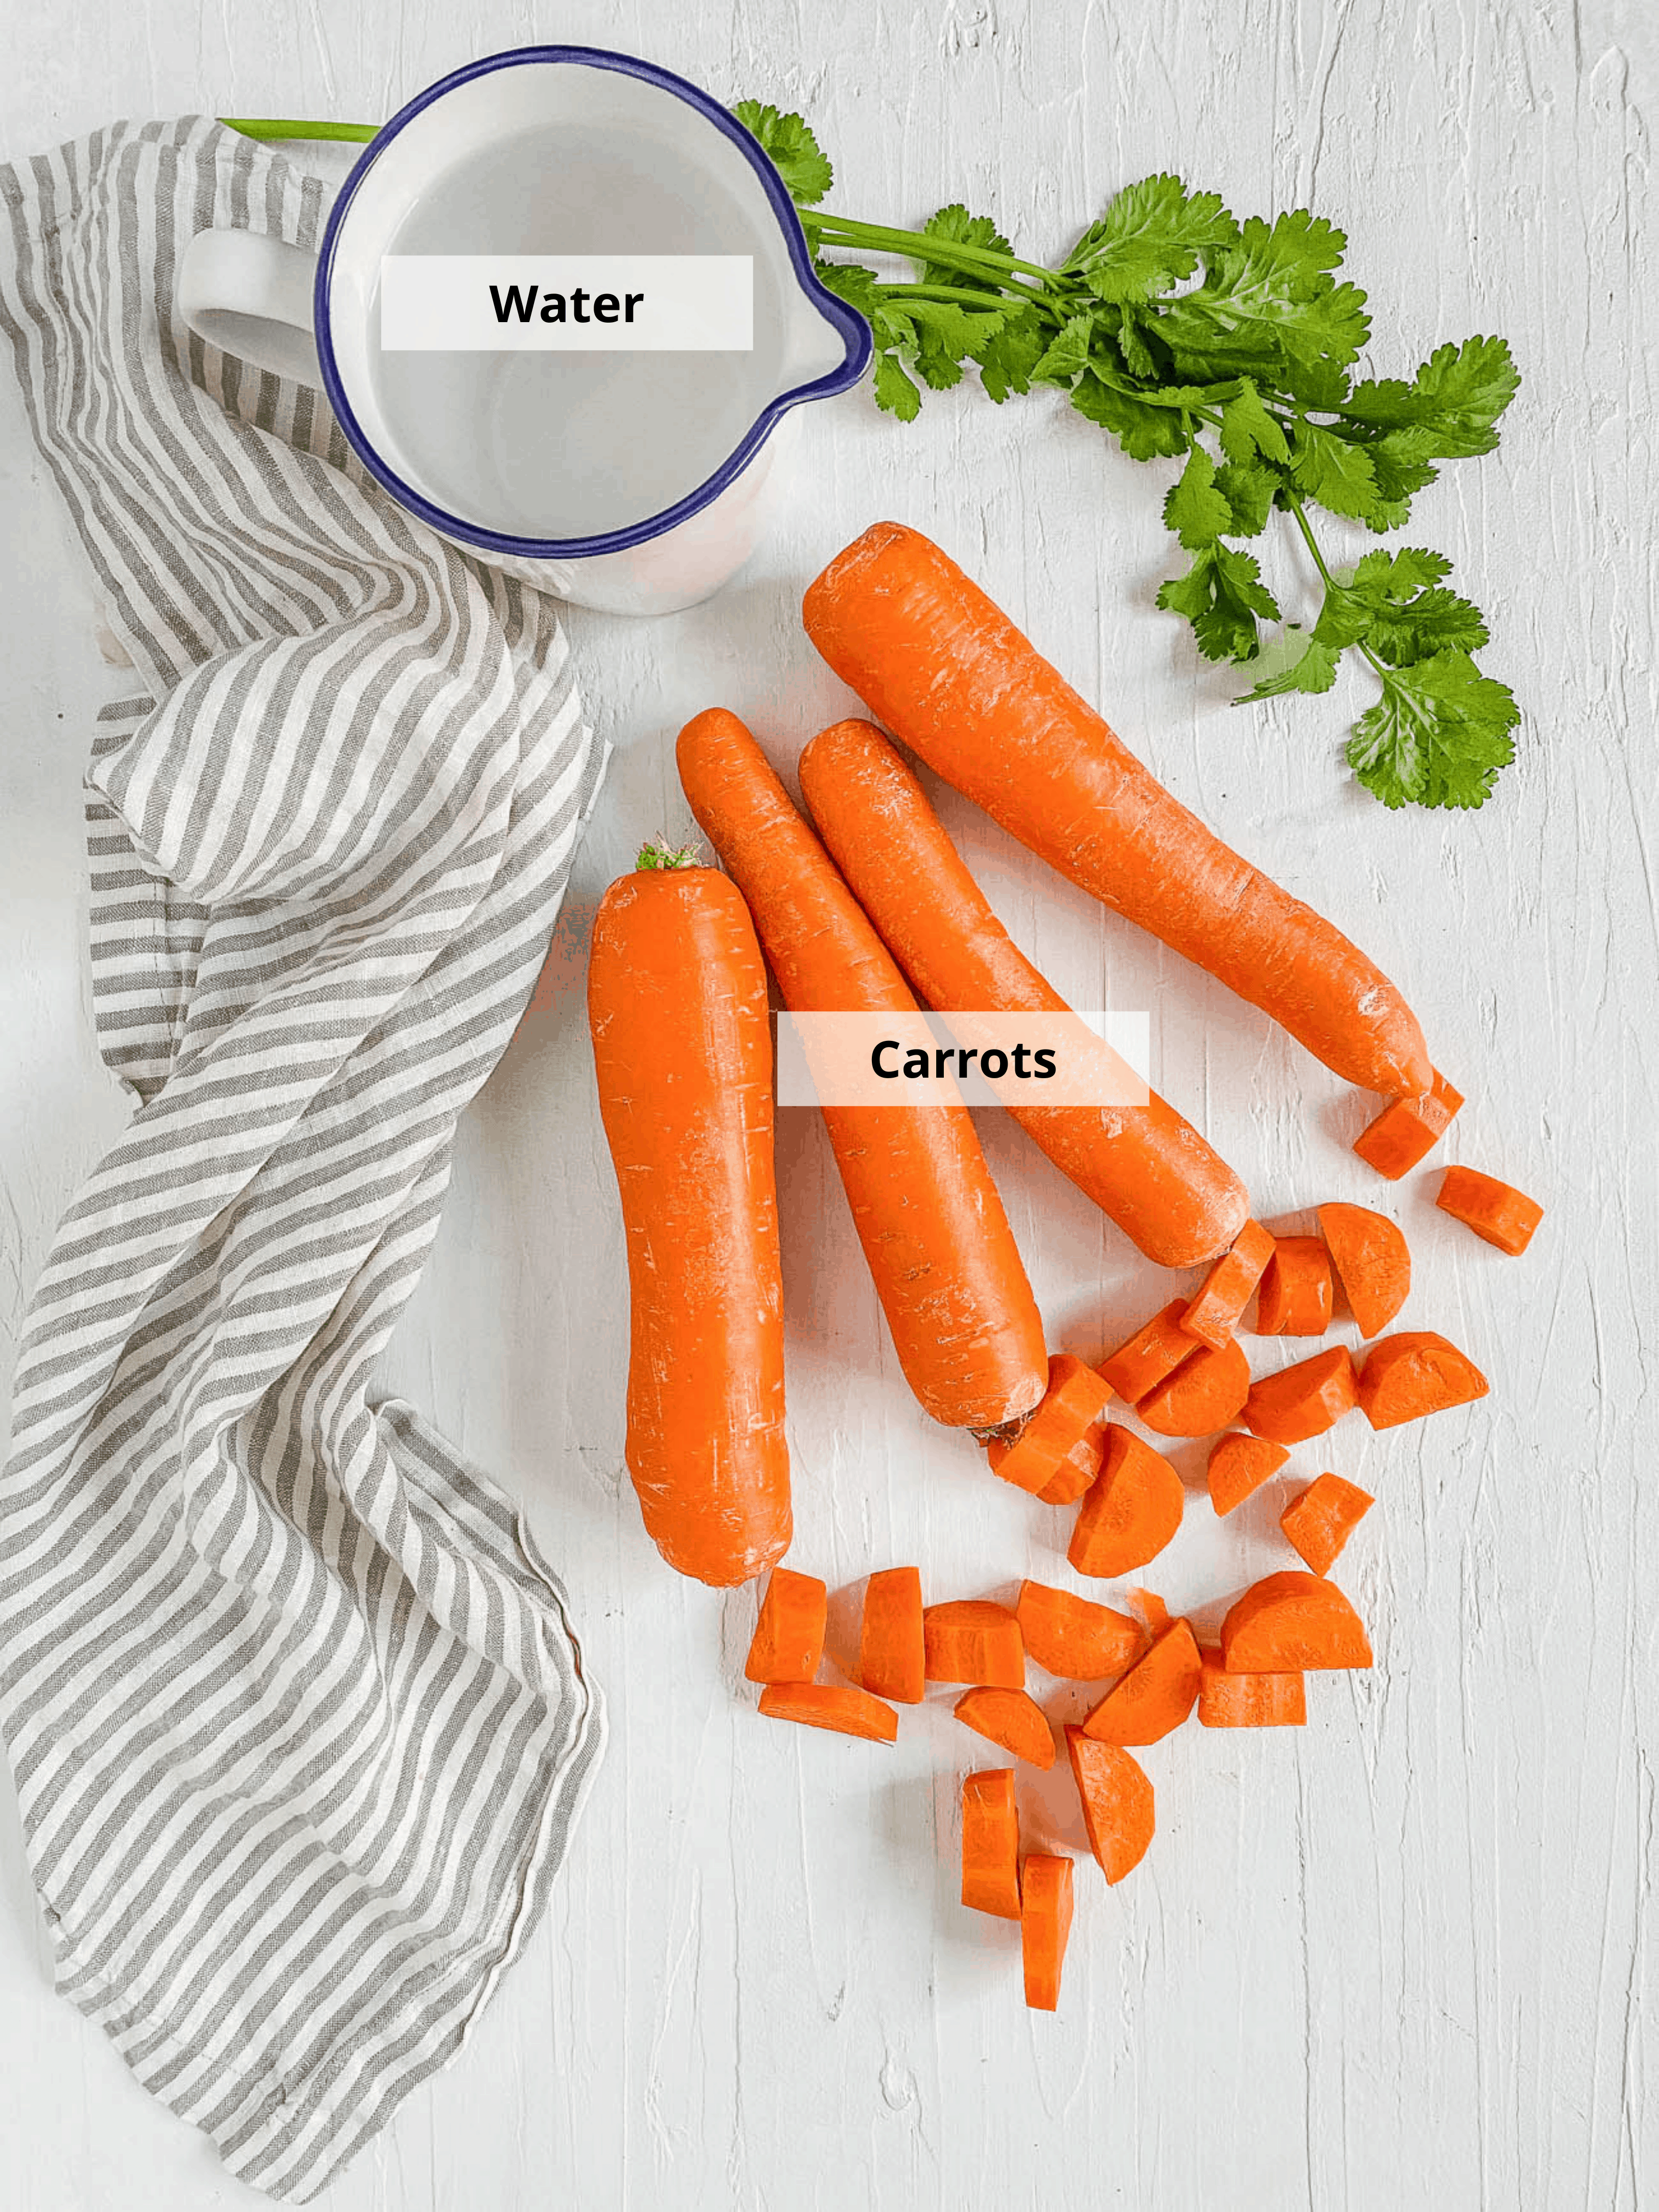 carrots and water